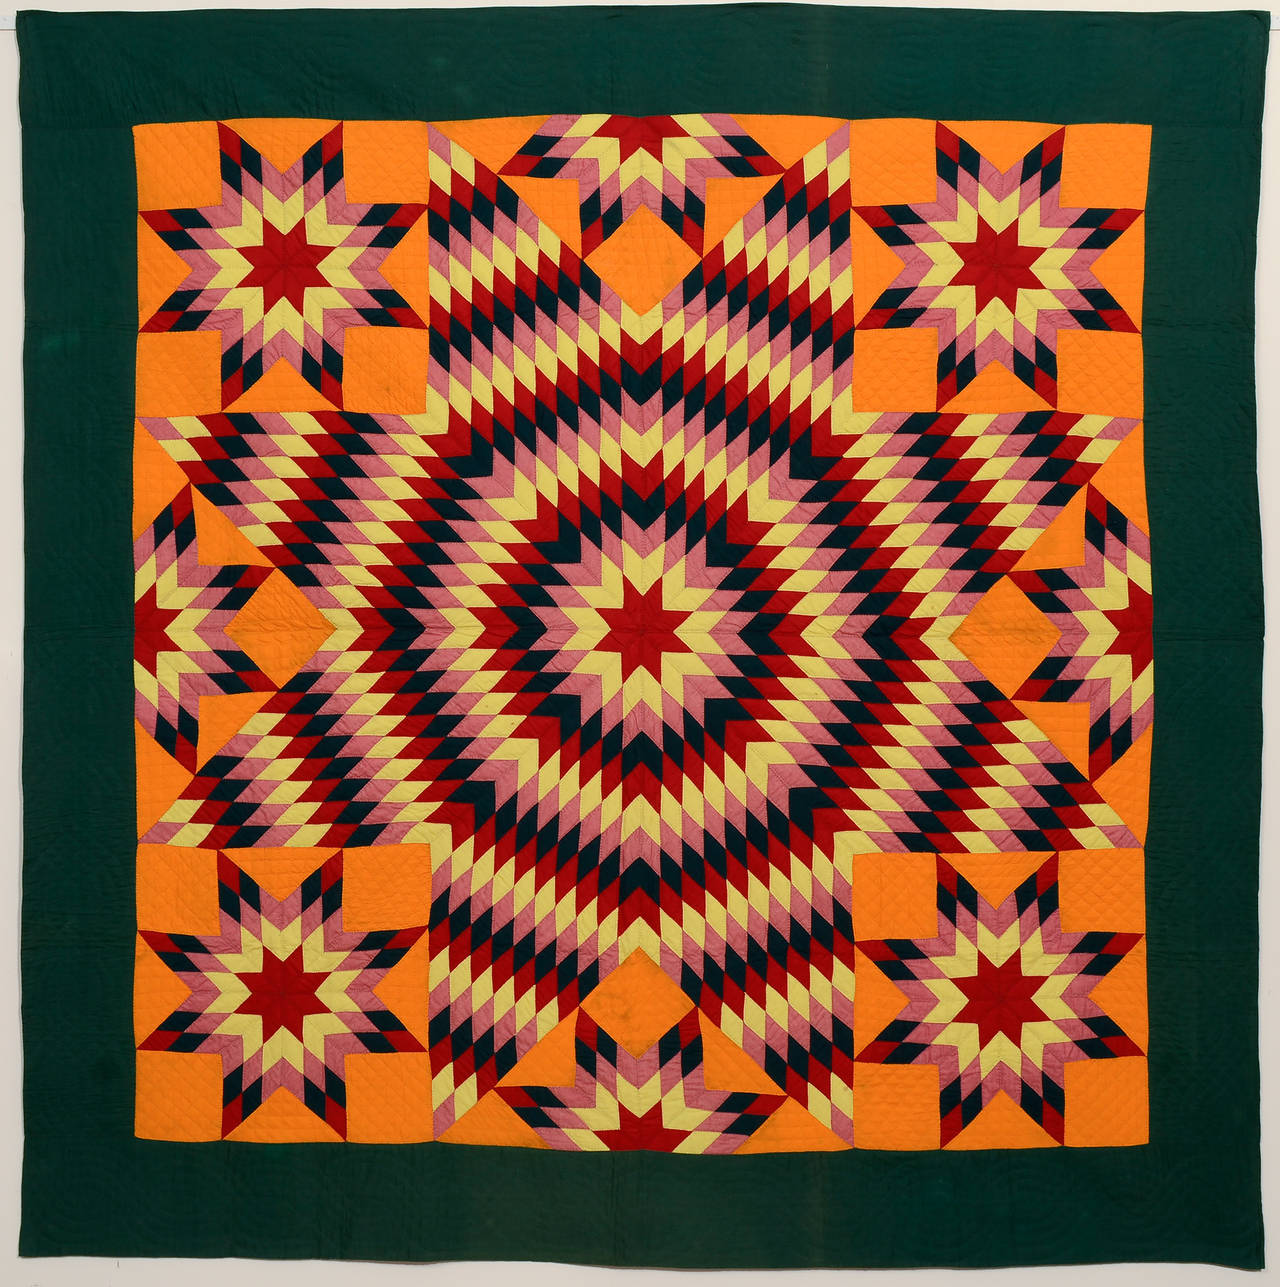 Wow, does this pop or what? This Star of Bethlehem quilt (aka Texas Star) is from Oley, Pennsylvania. It has all of the bold characteristics often seen in Berks County quilts. It is made entirely of solid color fabrics which adds tremendously to the